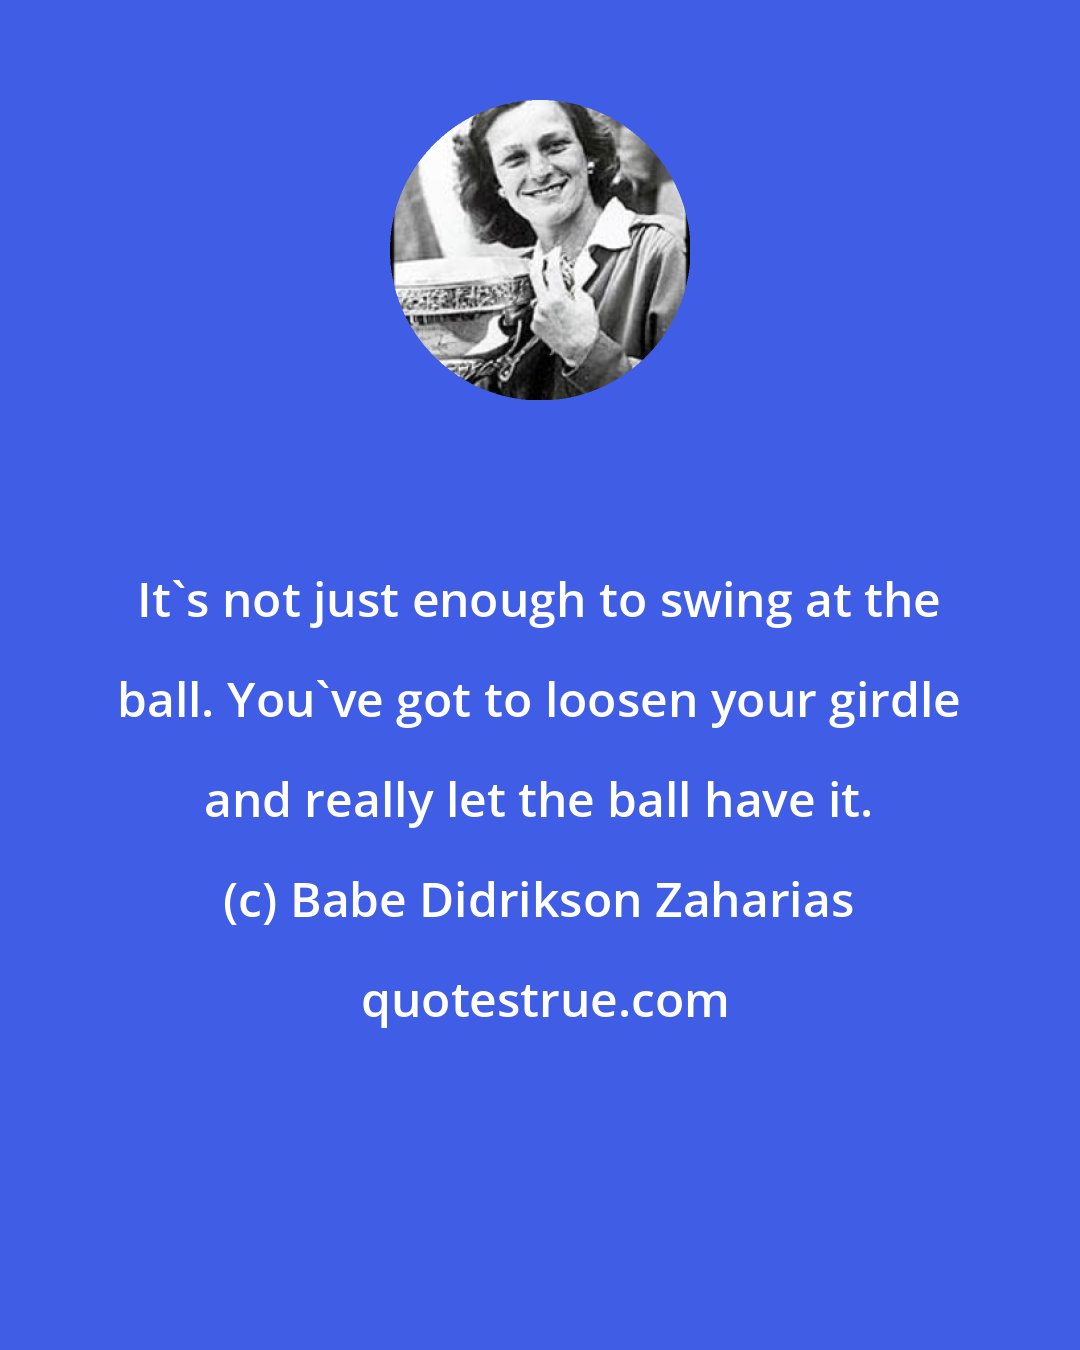 Babe Didrikson Zaharias: It's not just enough to swing at the ball. You've got to loosen your girdle and really let the ball have it.